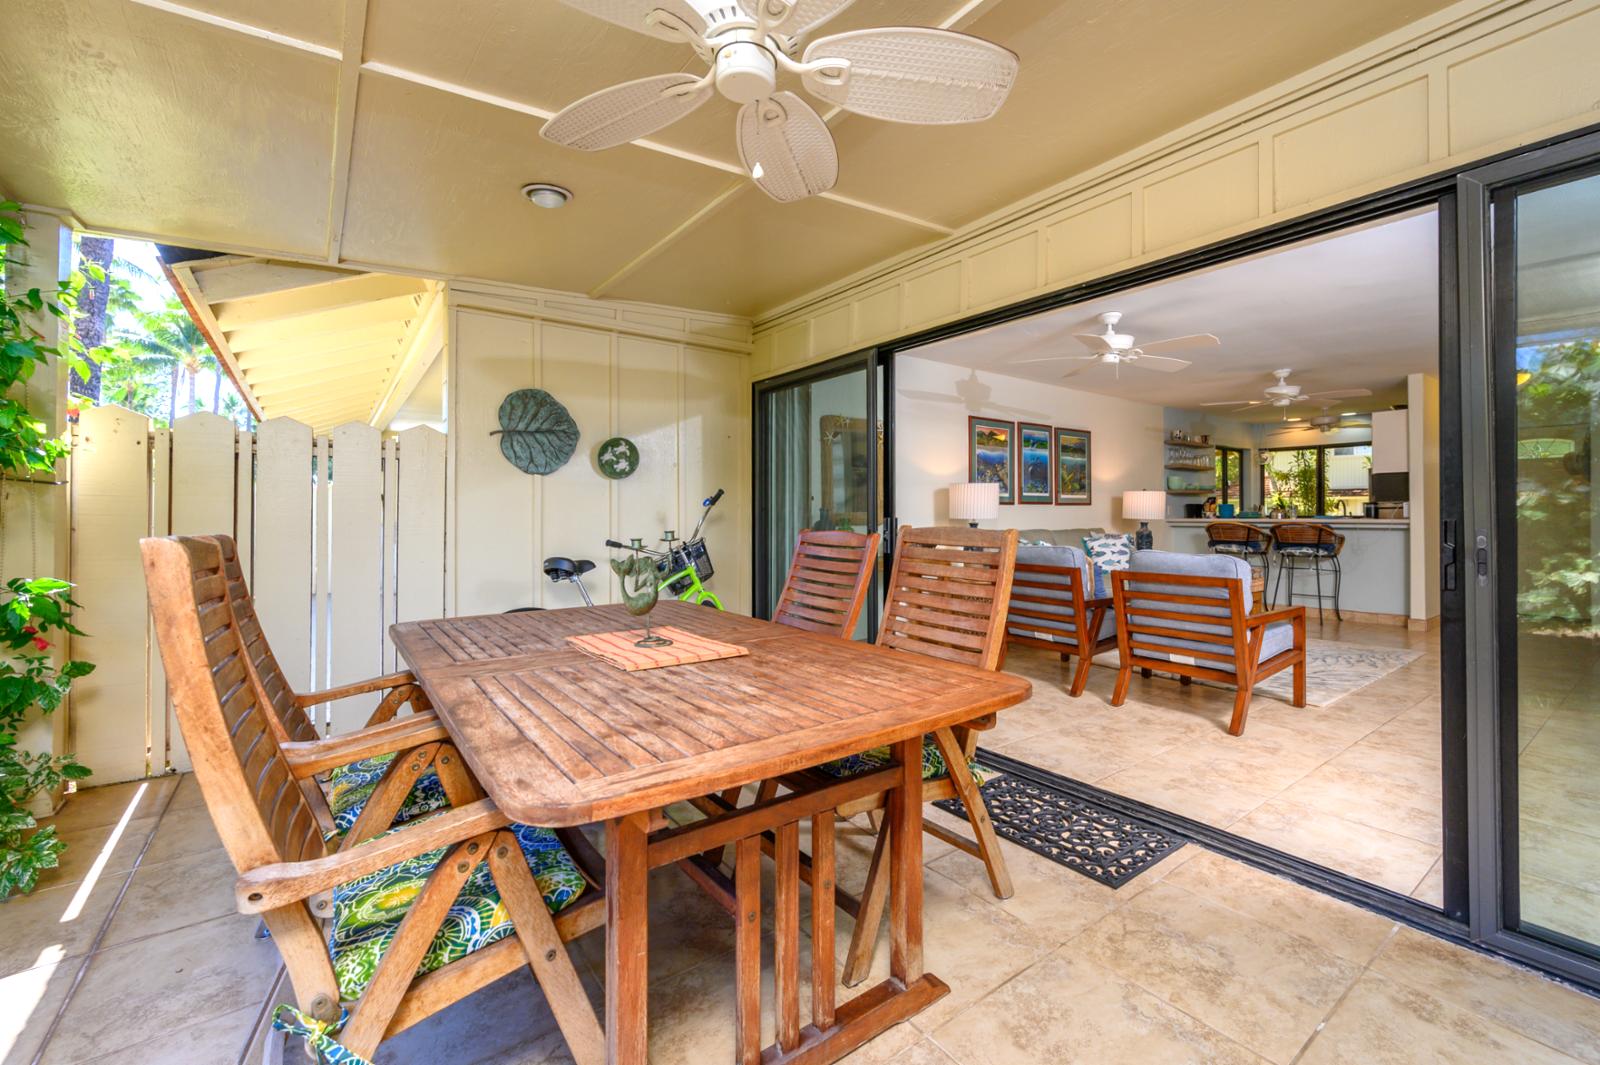 Enjoy outdoor meals while entertaining friends & family!